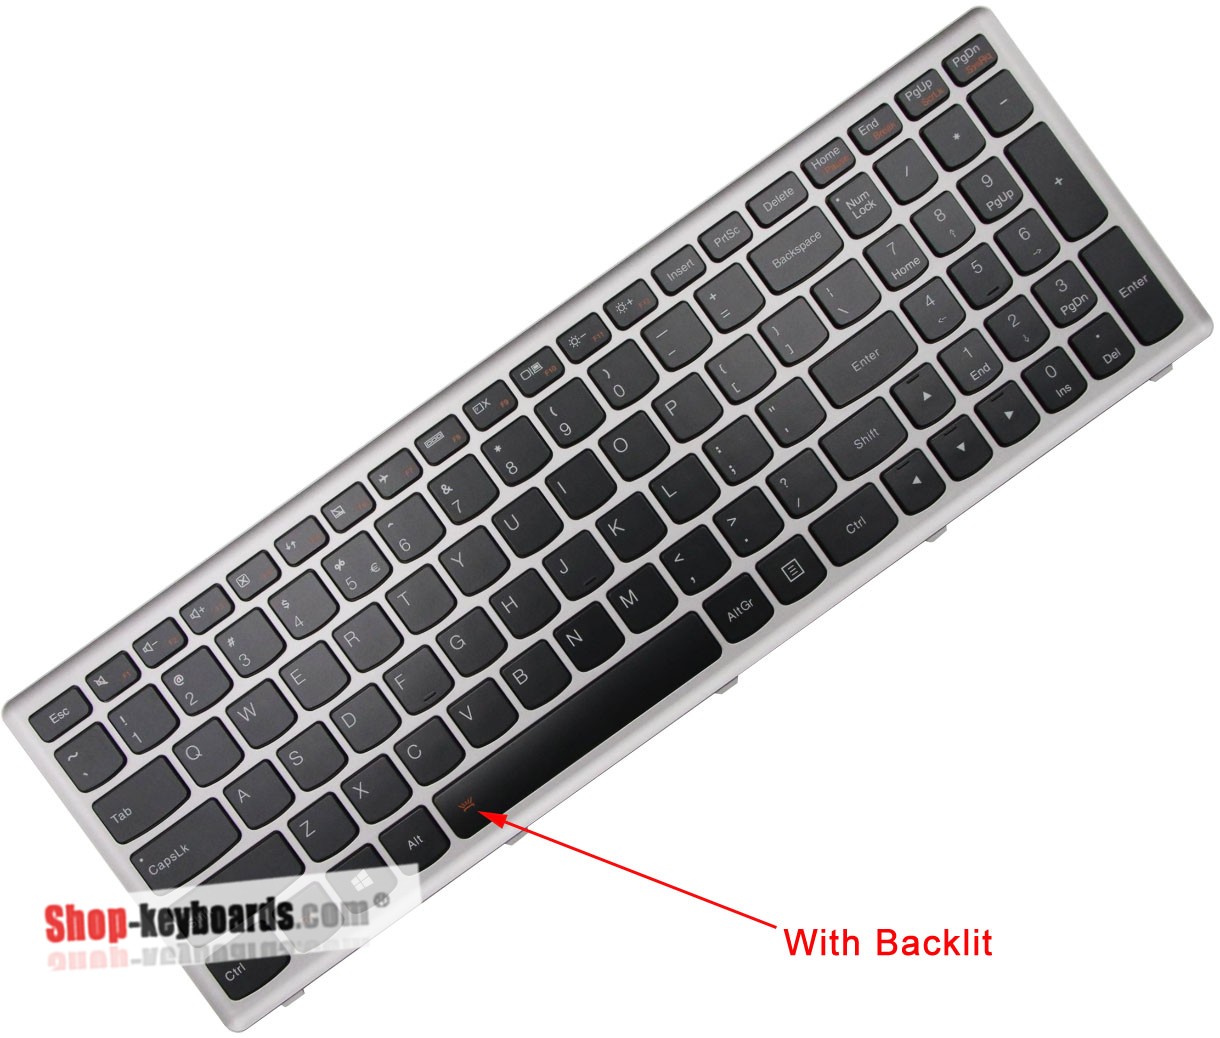 Lenovo IdeaPad Z500 Keyboard replacement